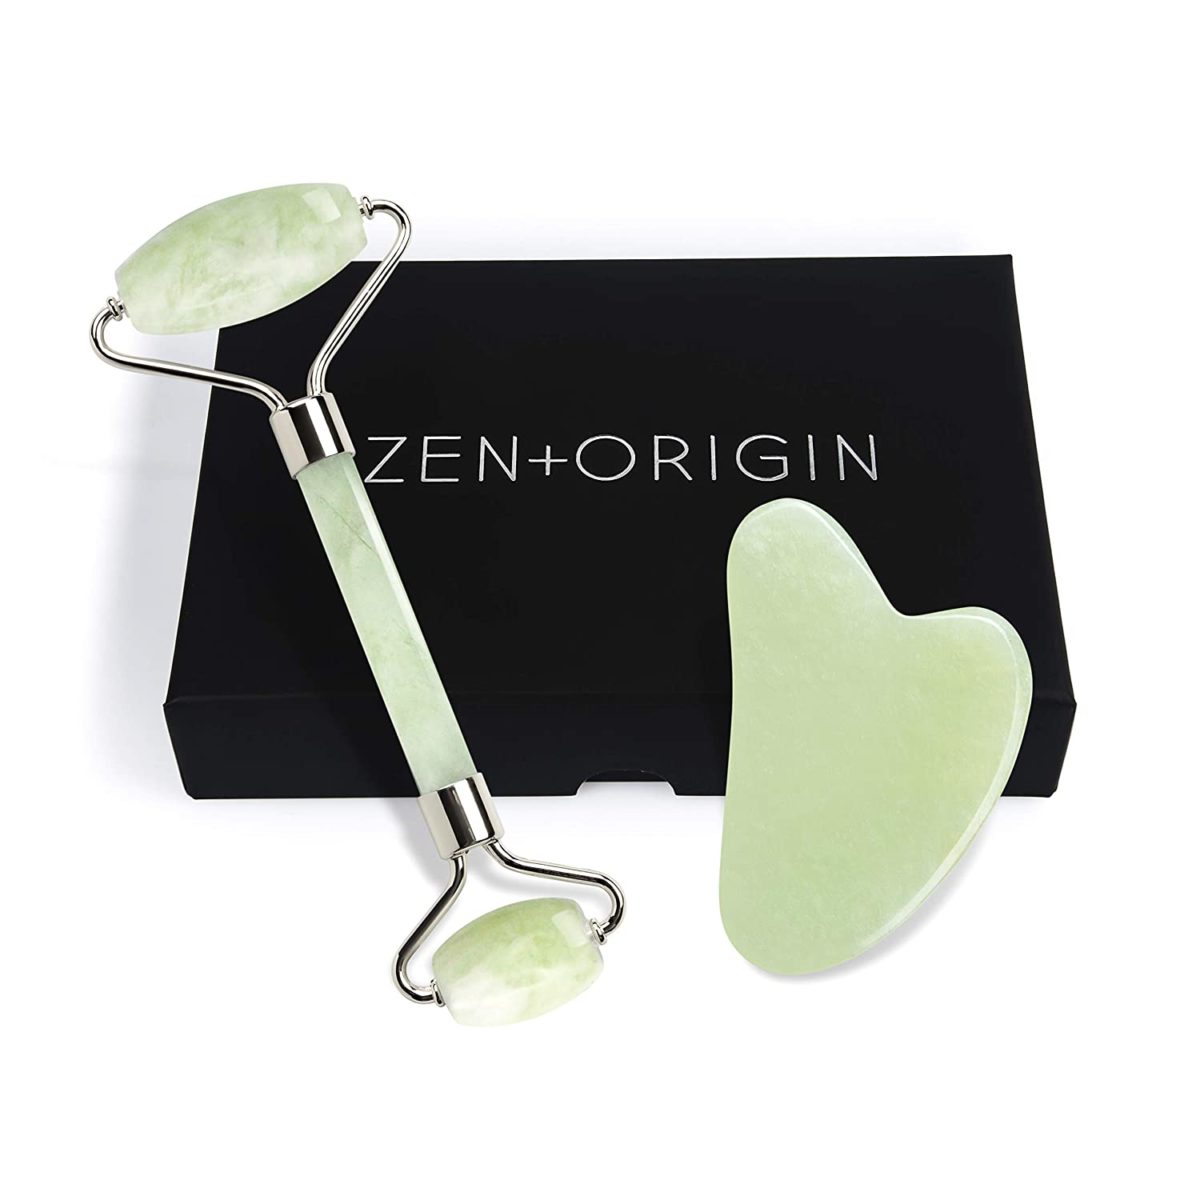 What Is a Jade Roller and the Gua Sha and Why You Should Use Them?